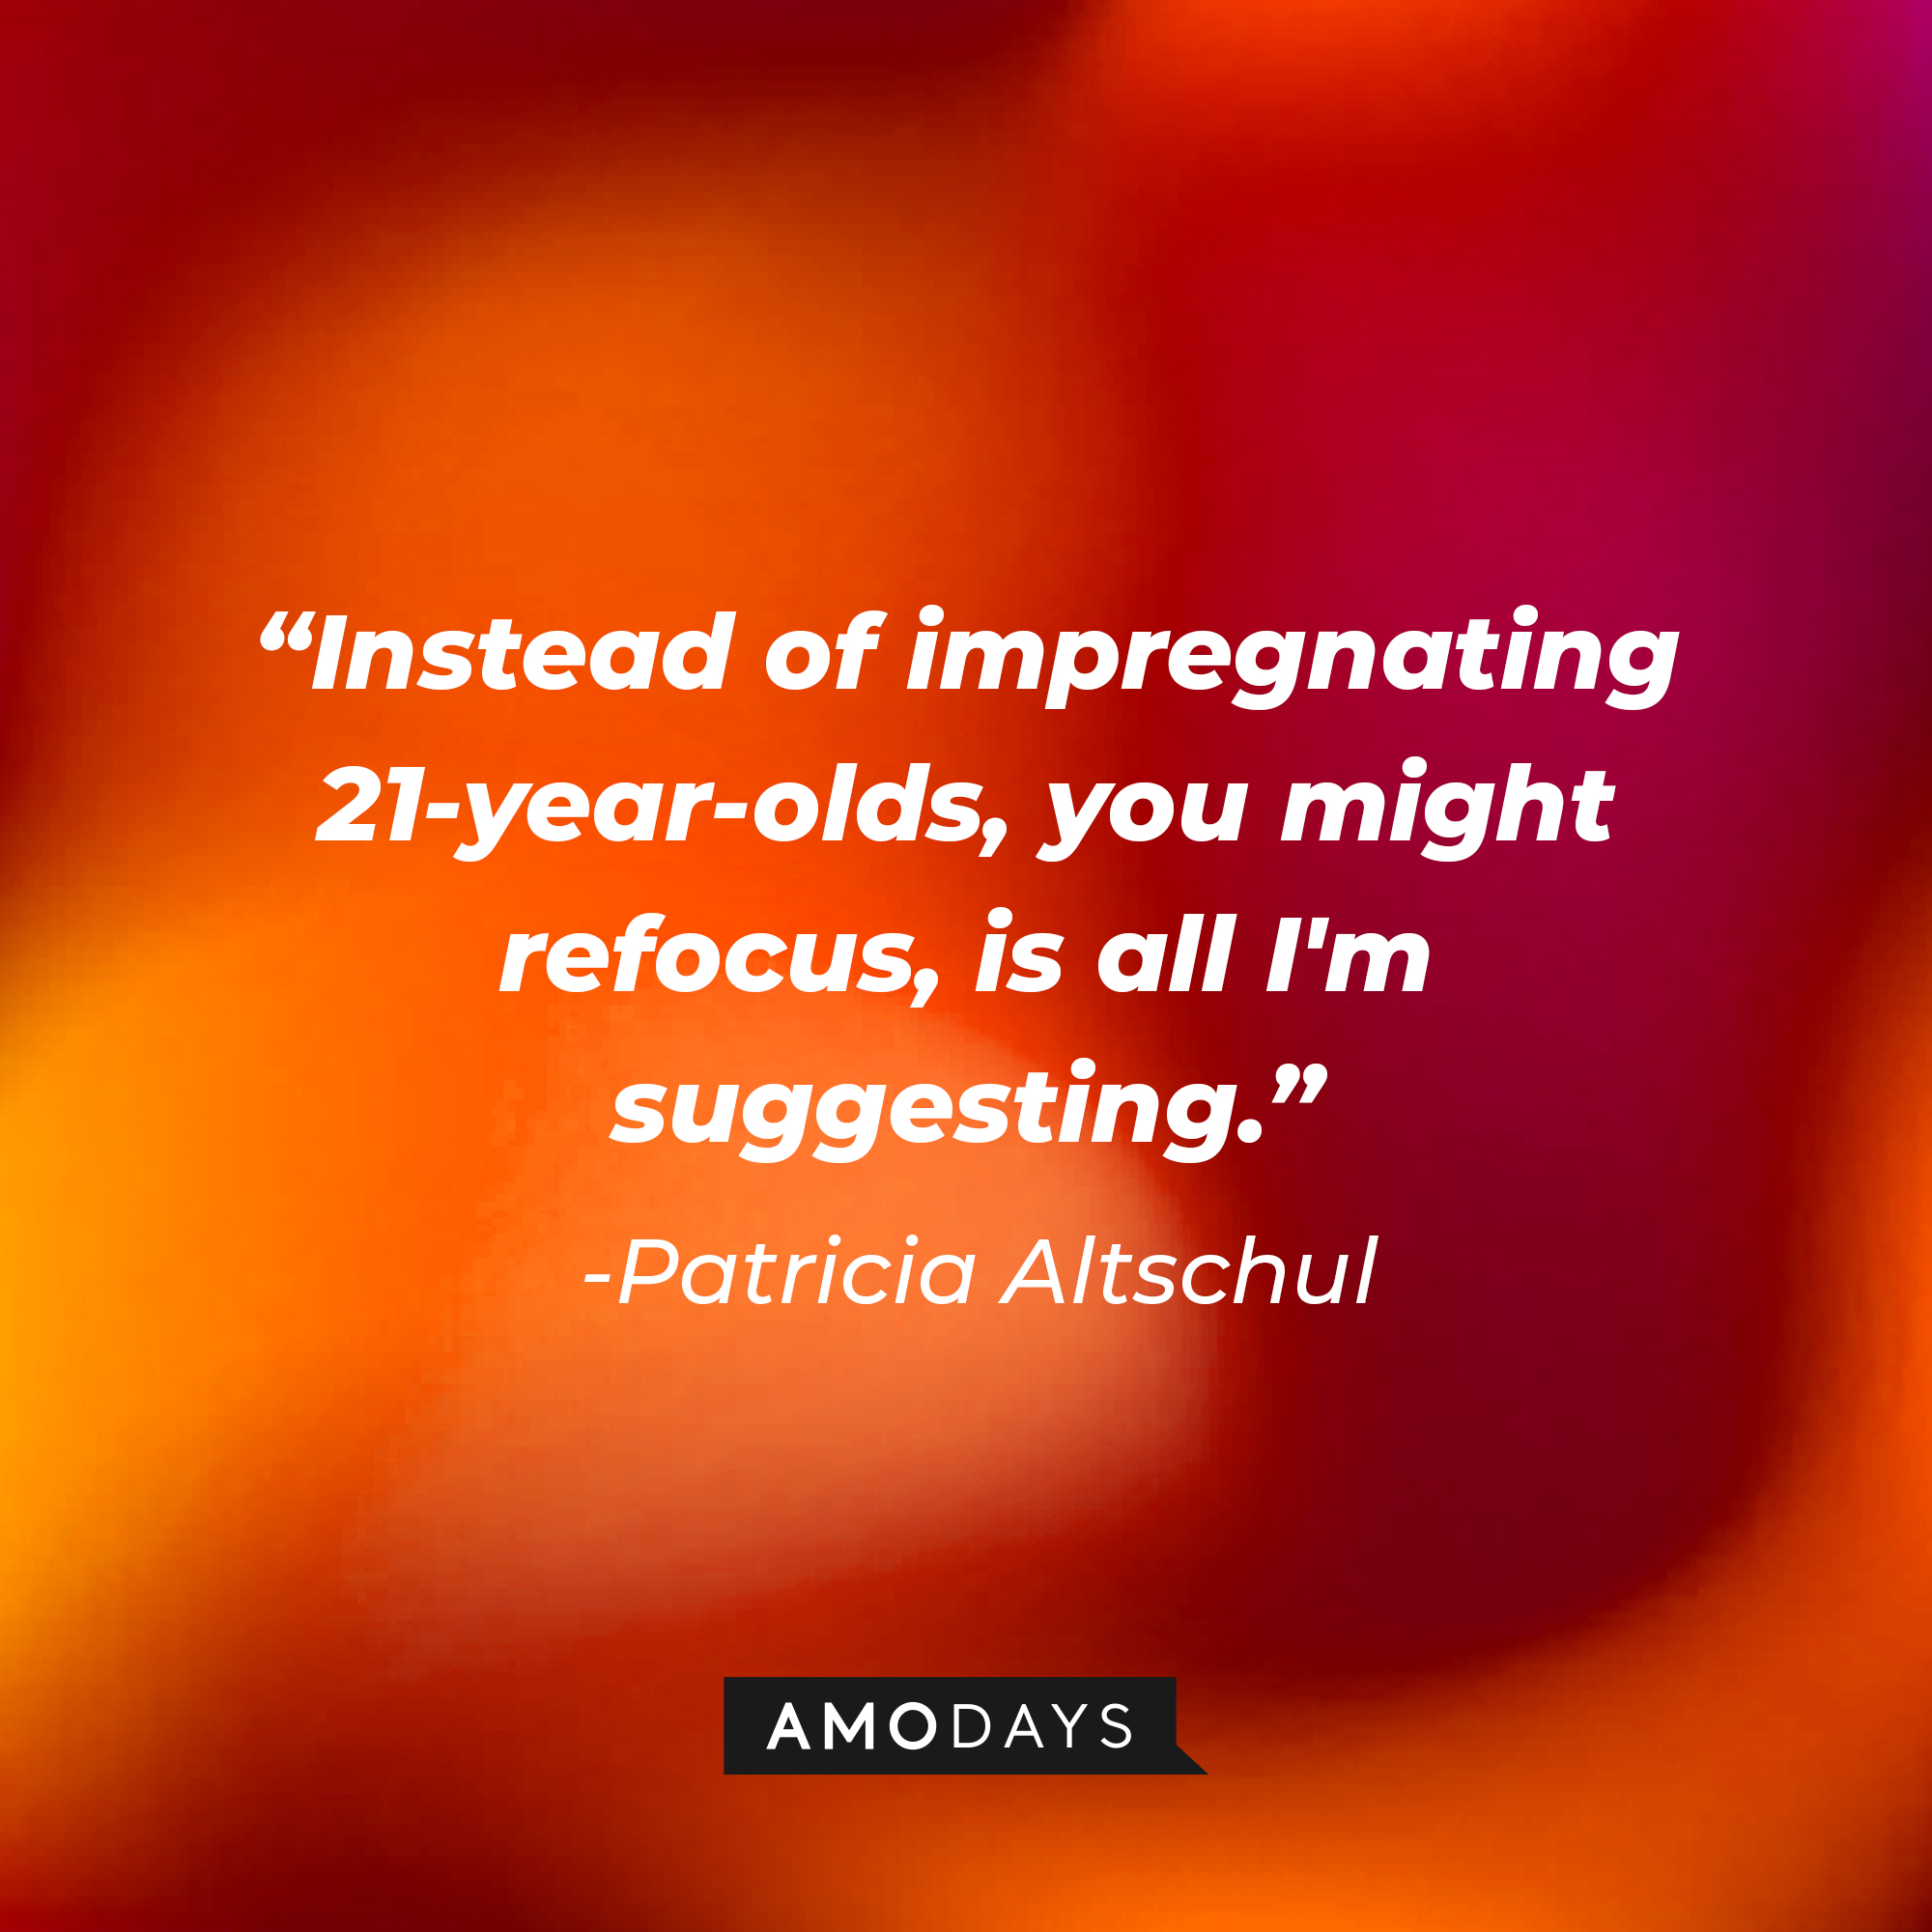 Patricia Altschul's quote: "Instead of impregnating 21-year-olds, you might refocus, is all I'm suggesting." | Source: AmoDays